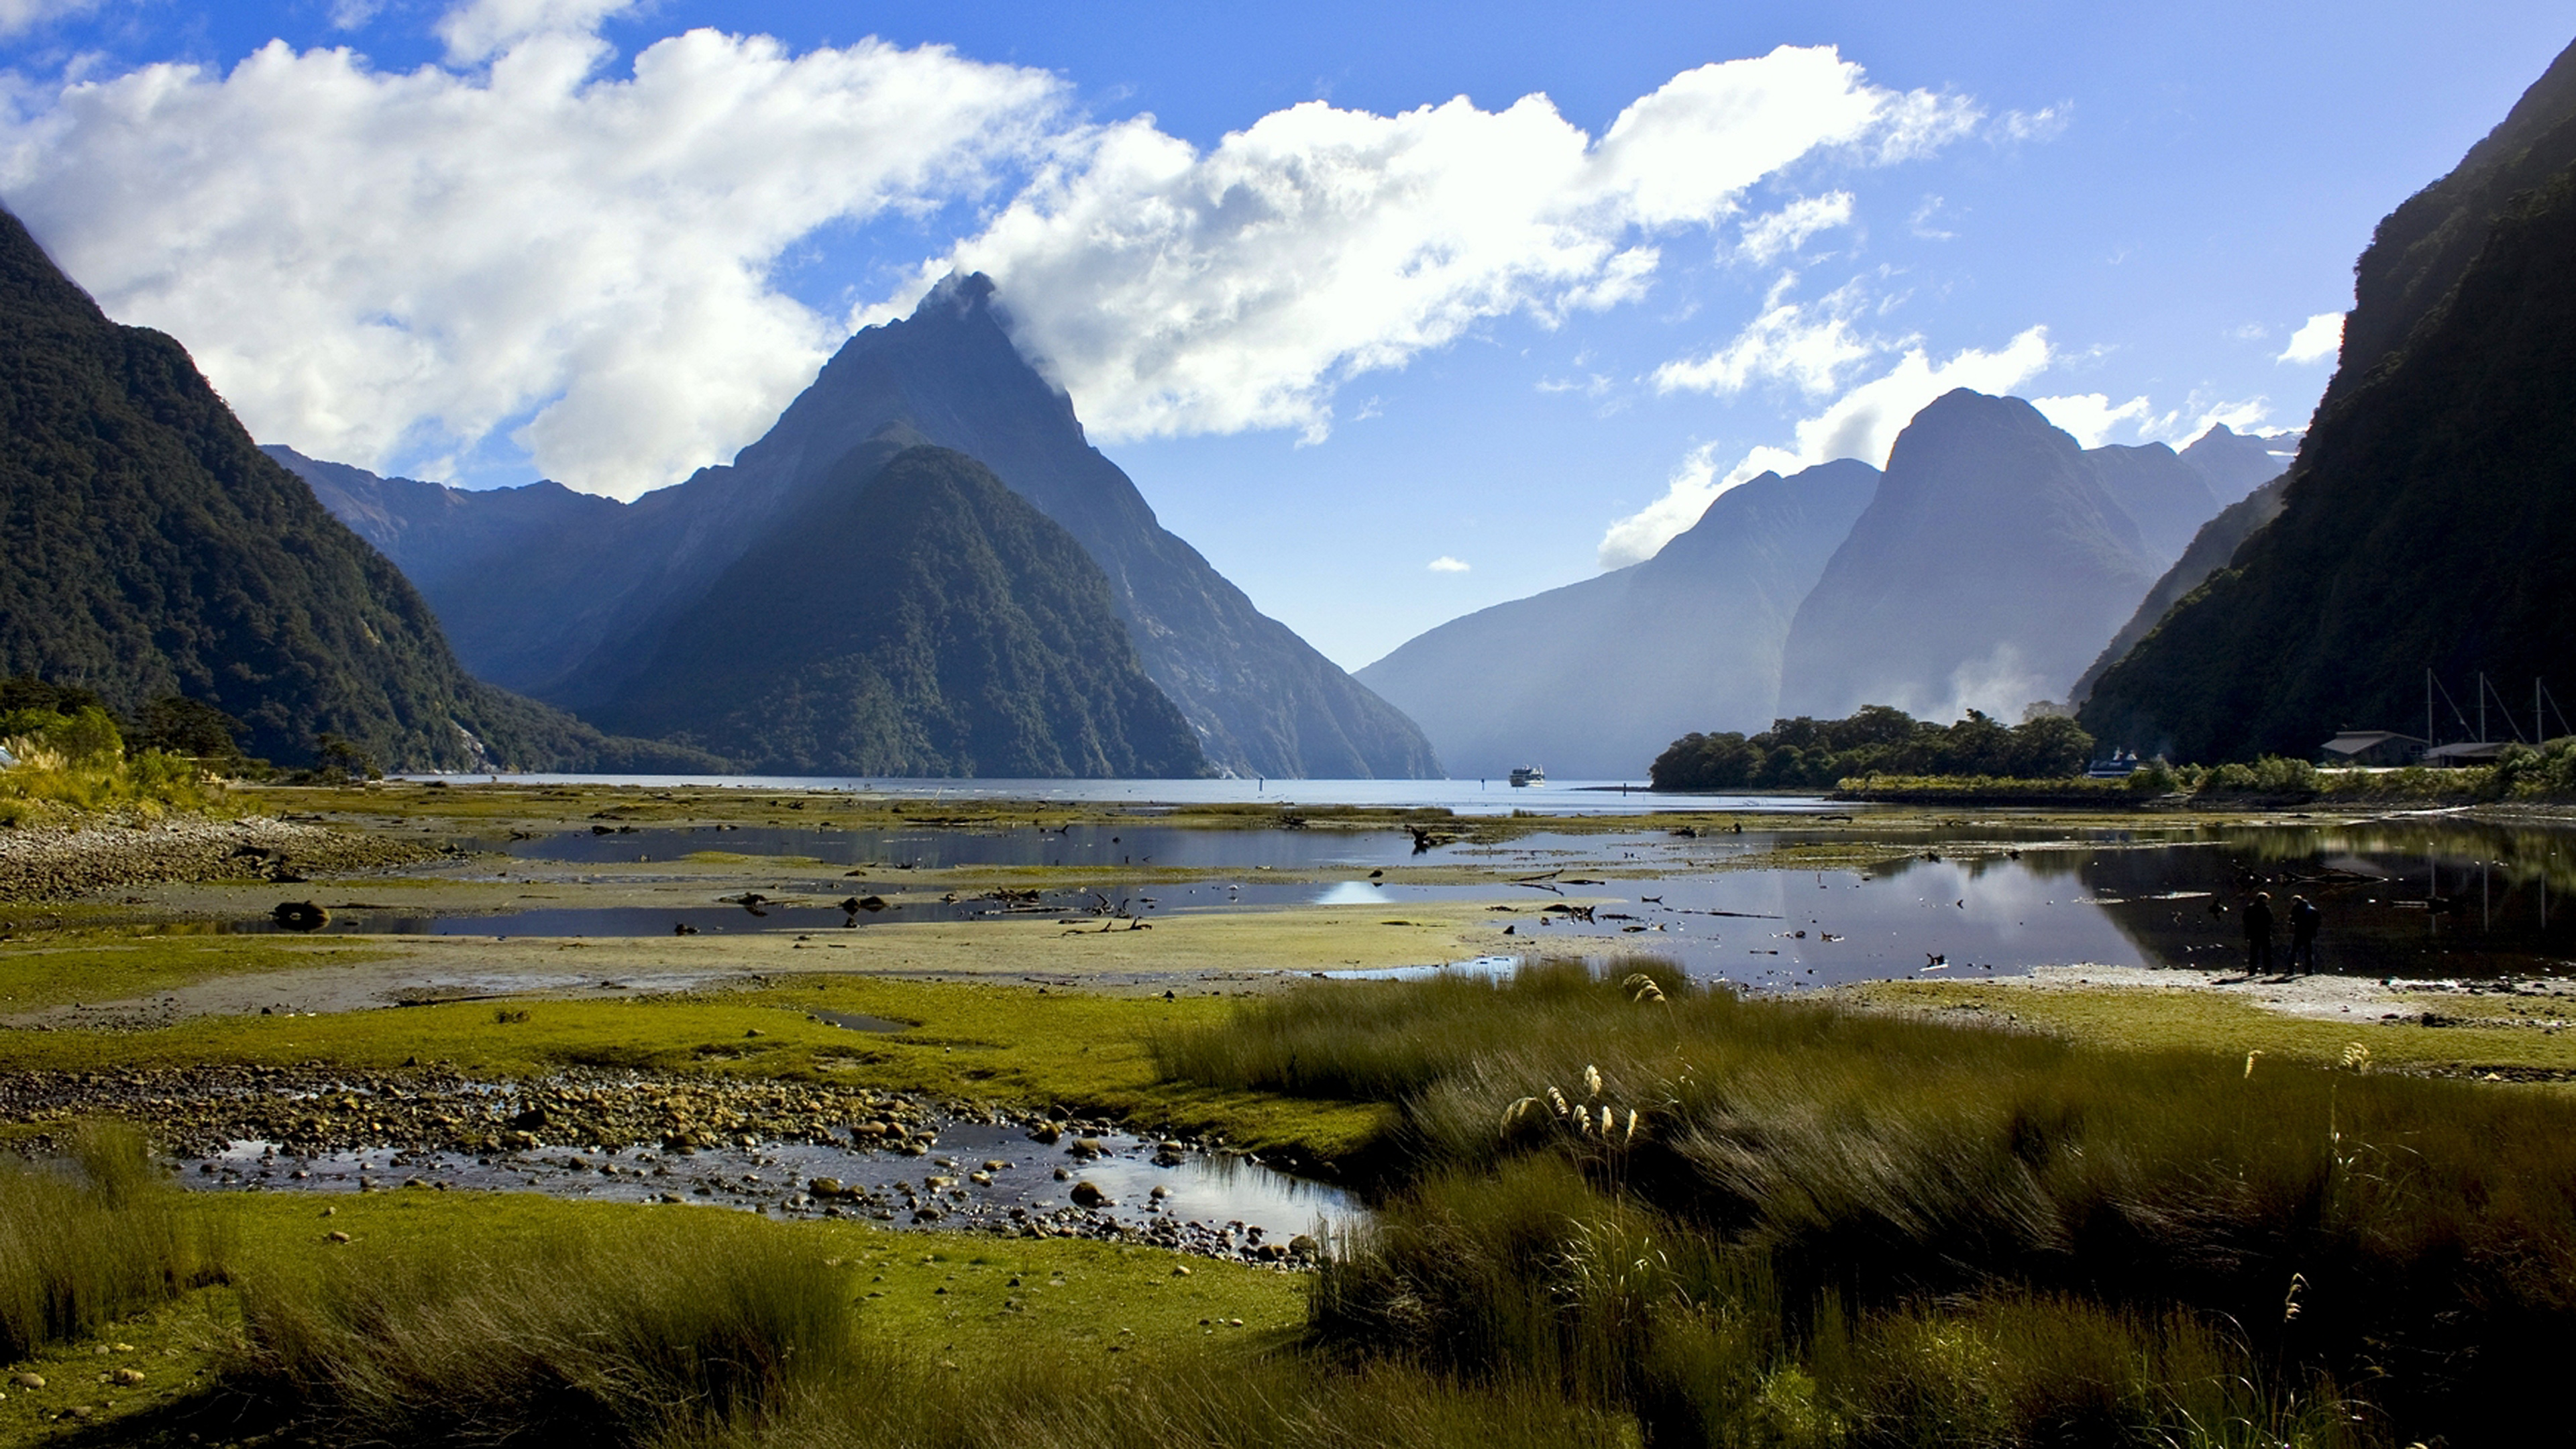 Milford Sound Or Piopiotahi In Maori Is Fjord Southwest Of The South